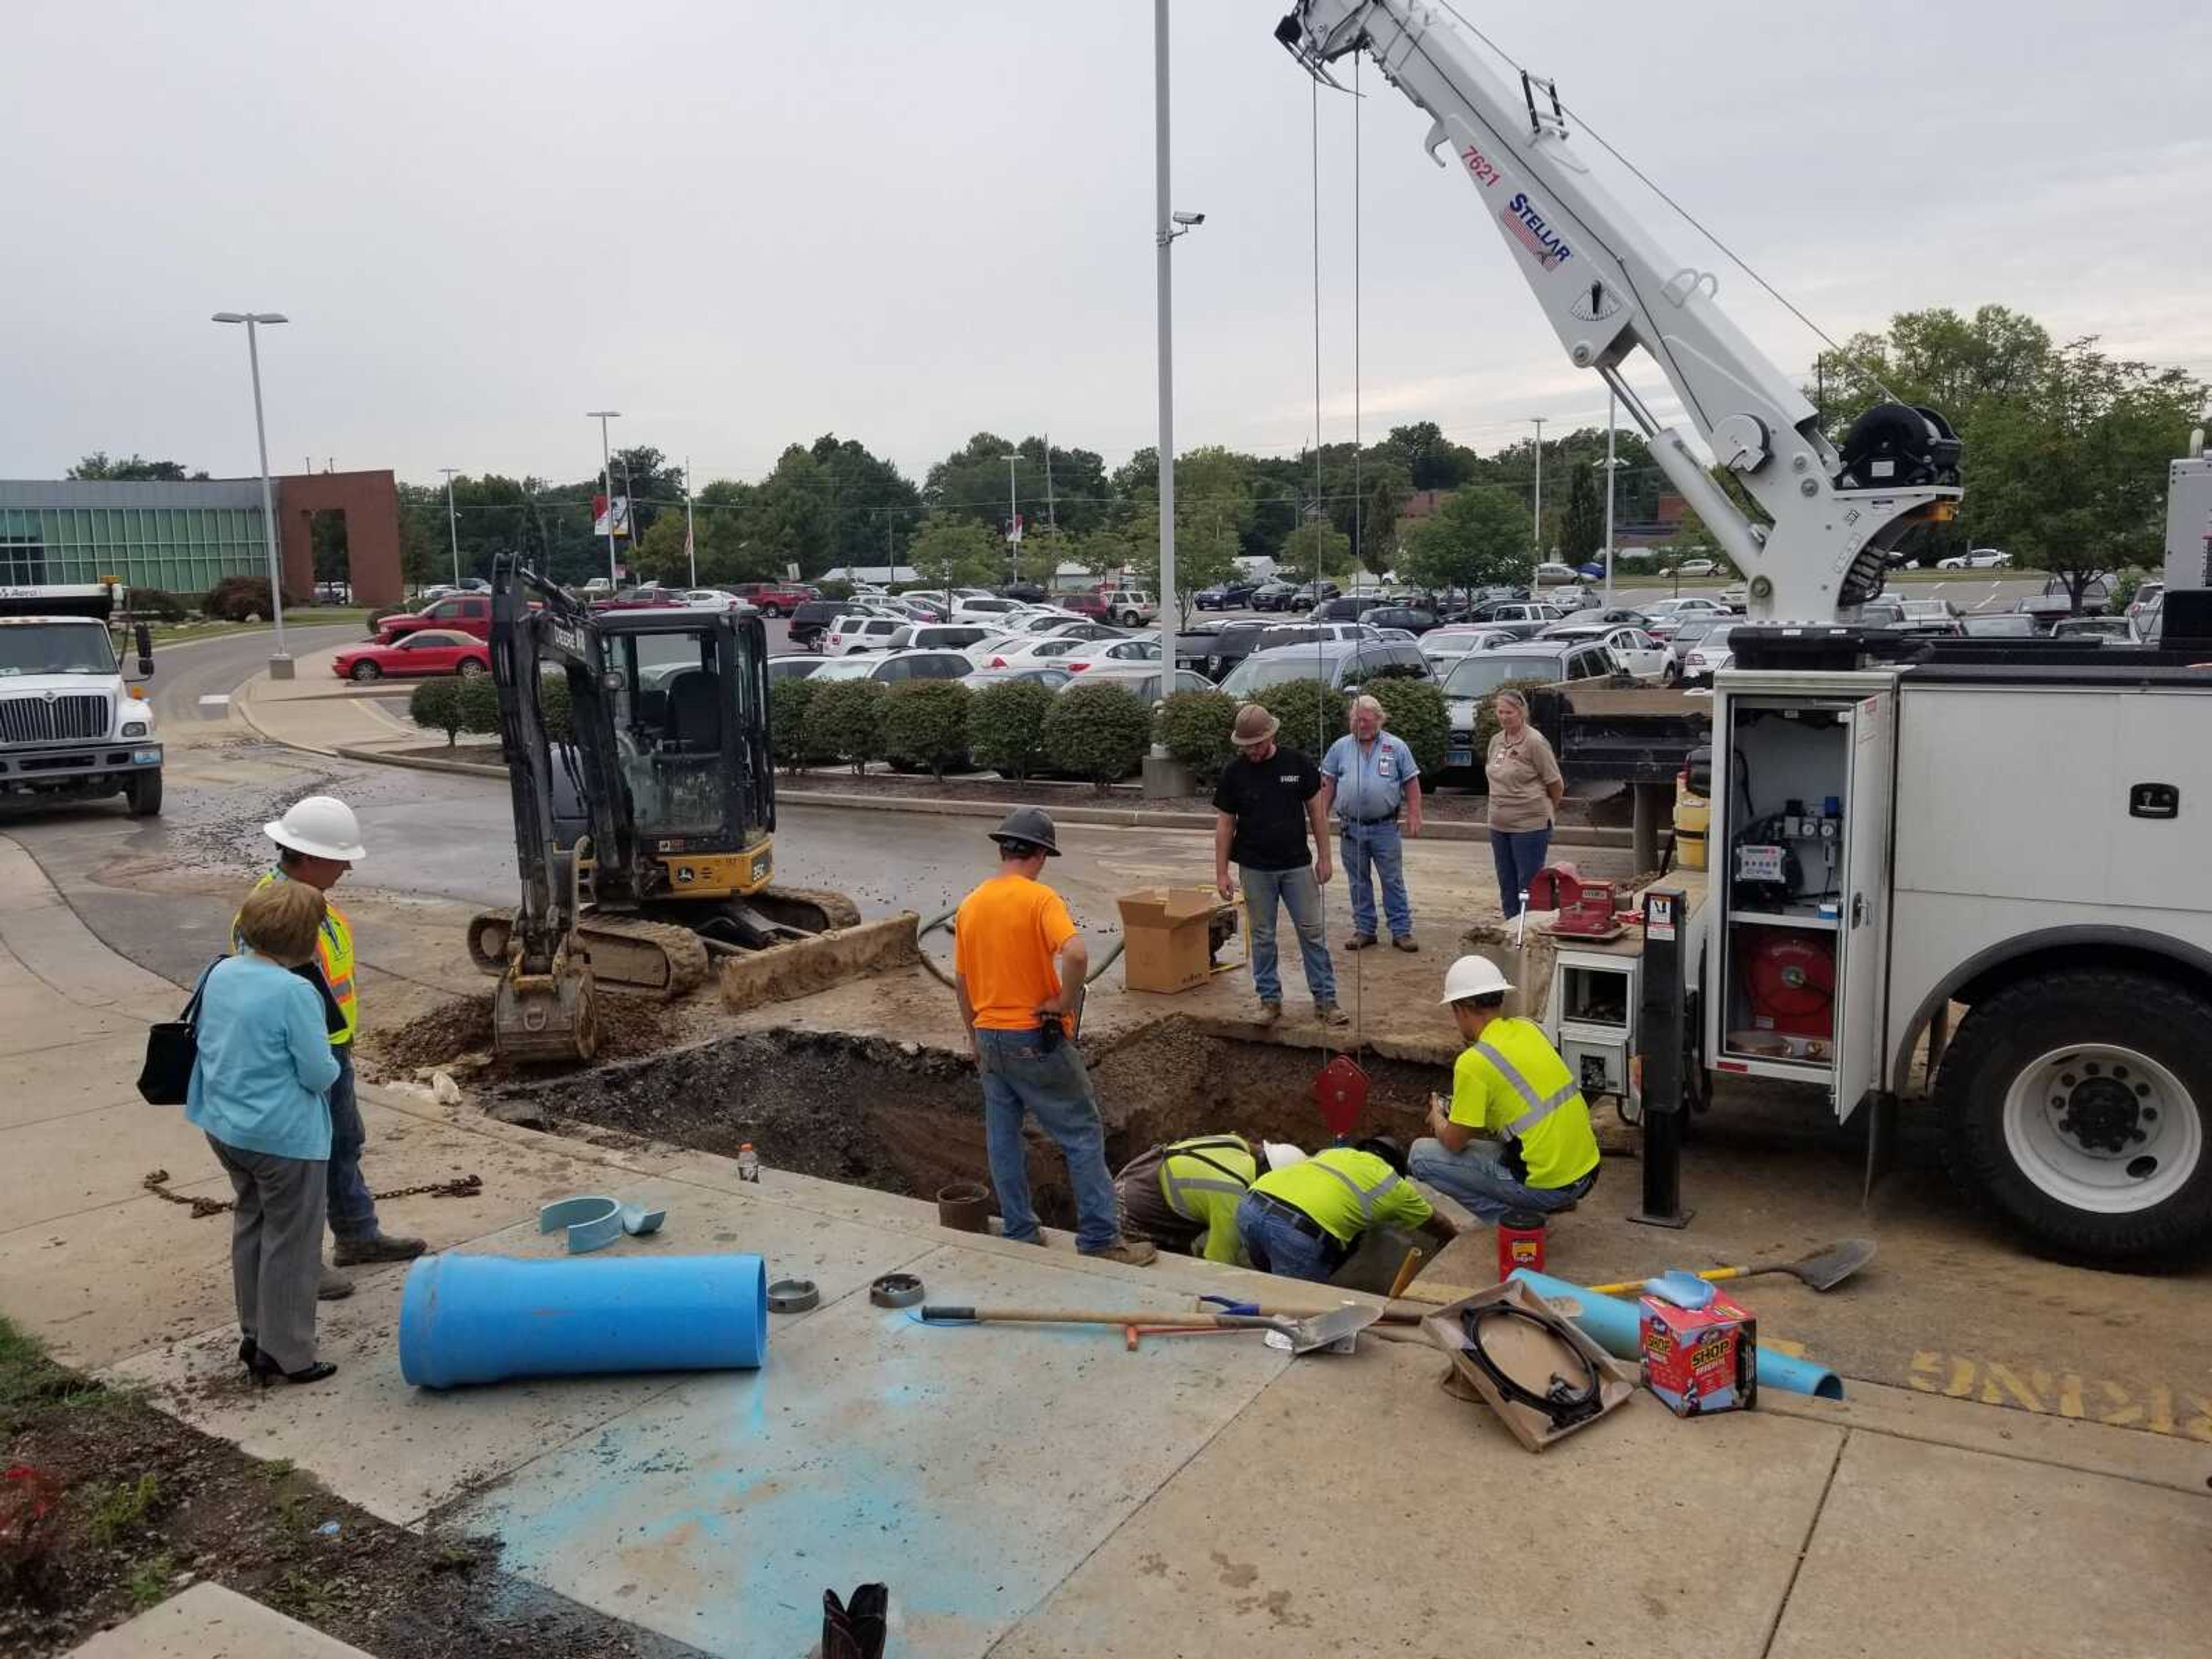 Crews work to fix the broken water main on Sept. 12 at River Campus.